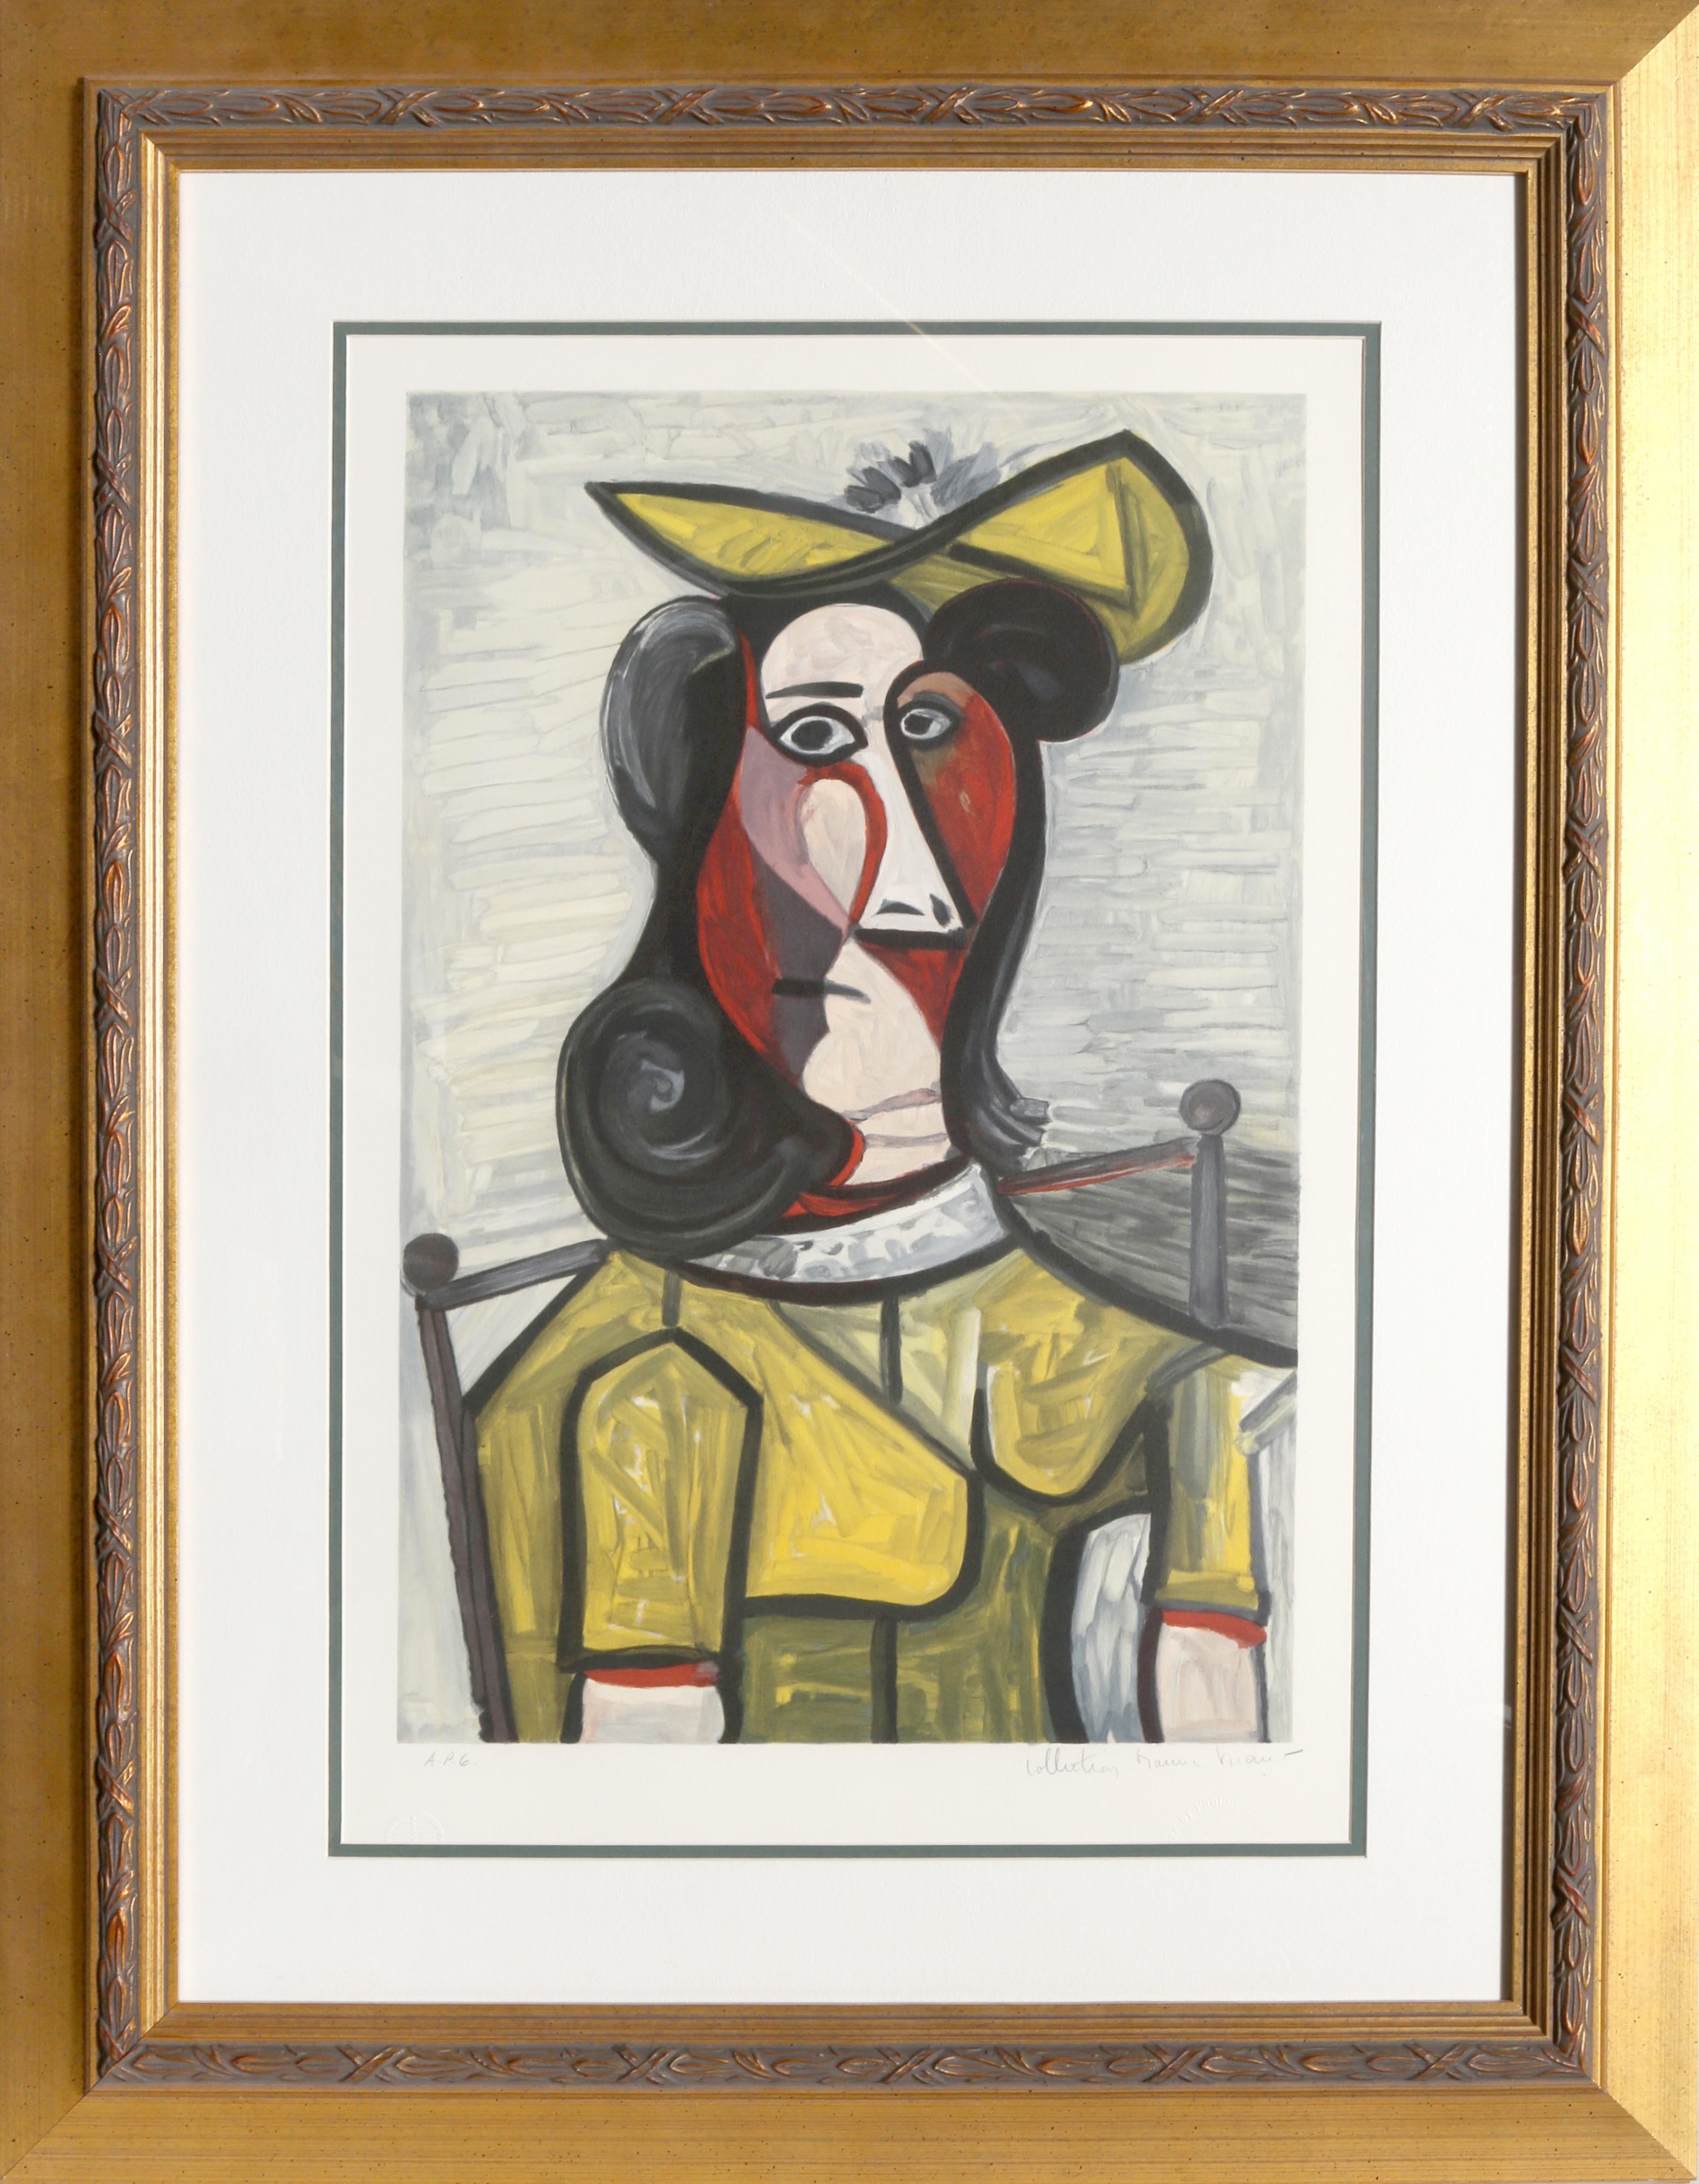 A lithograph from the Marina Picasso Estate Collection after the Pablo Picasso painting "Portrait de Femme au Chapeau et a la Robe Vert Jaune".  The original painting was completed in 1943. In the 1970's after Picasso's death, Marina Picasso, his